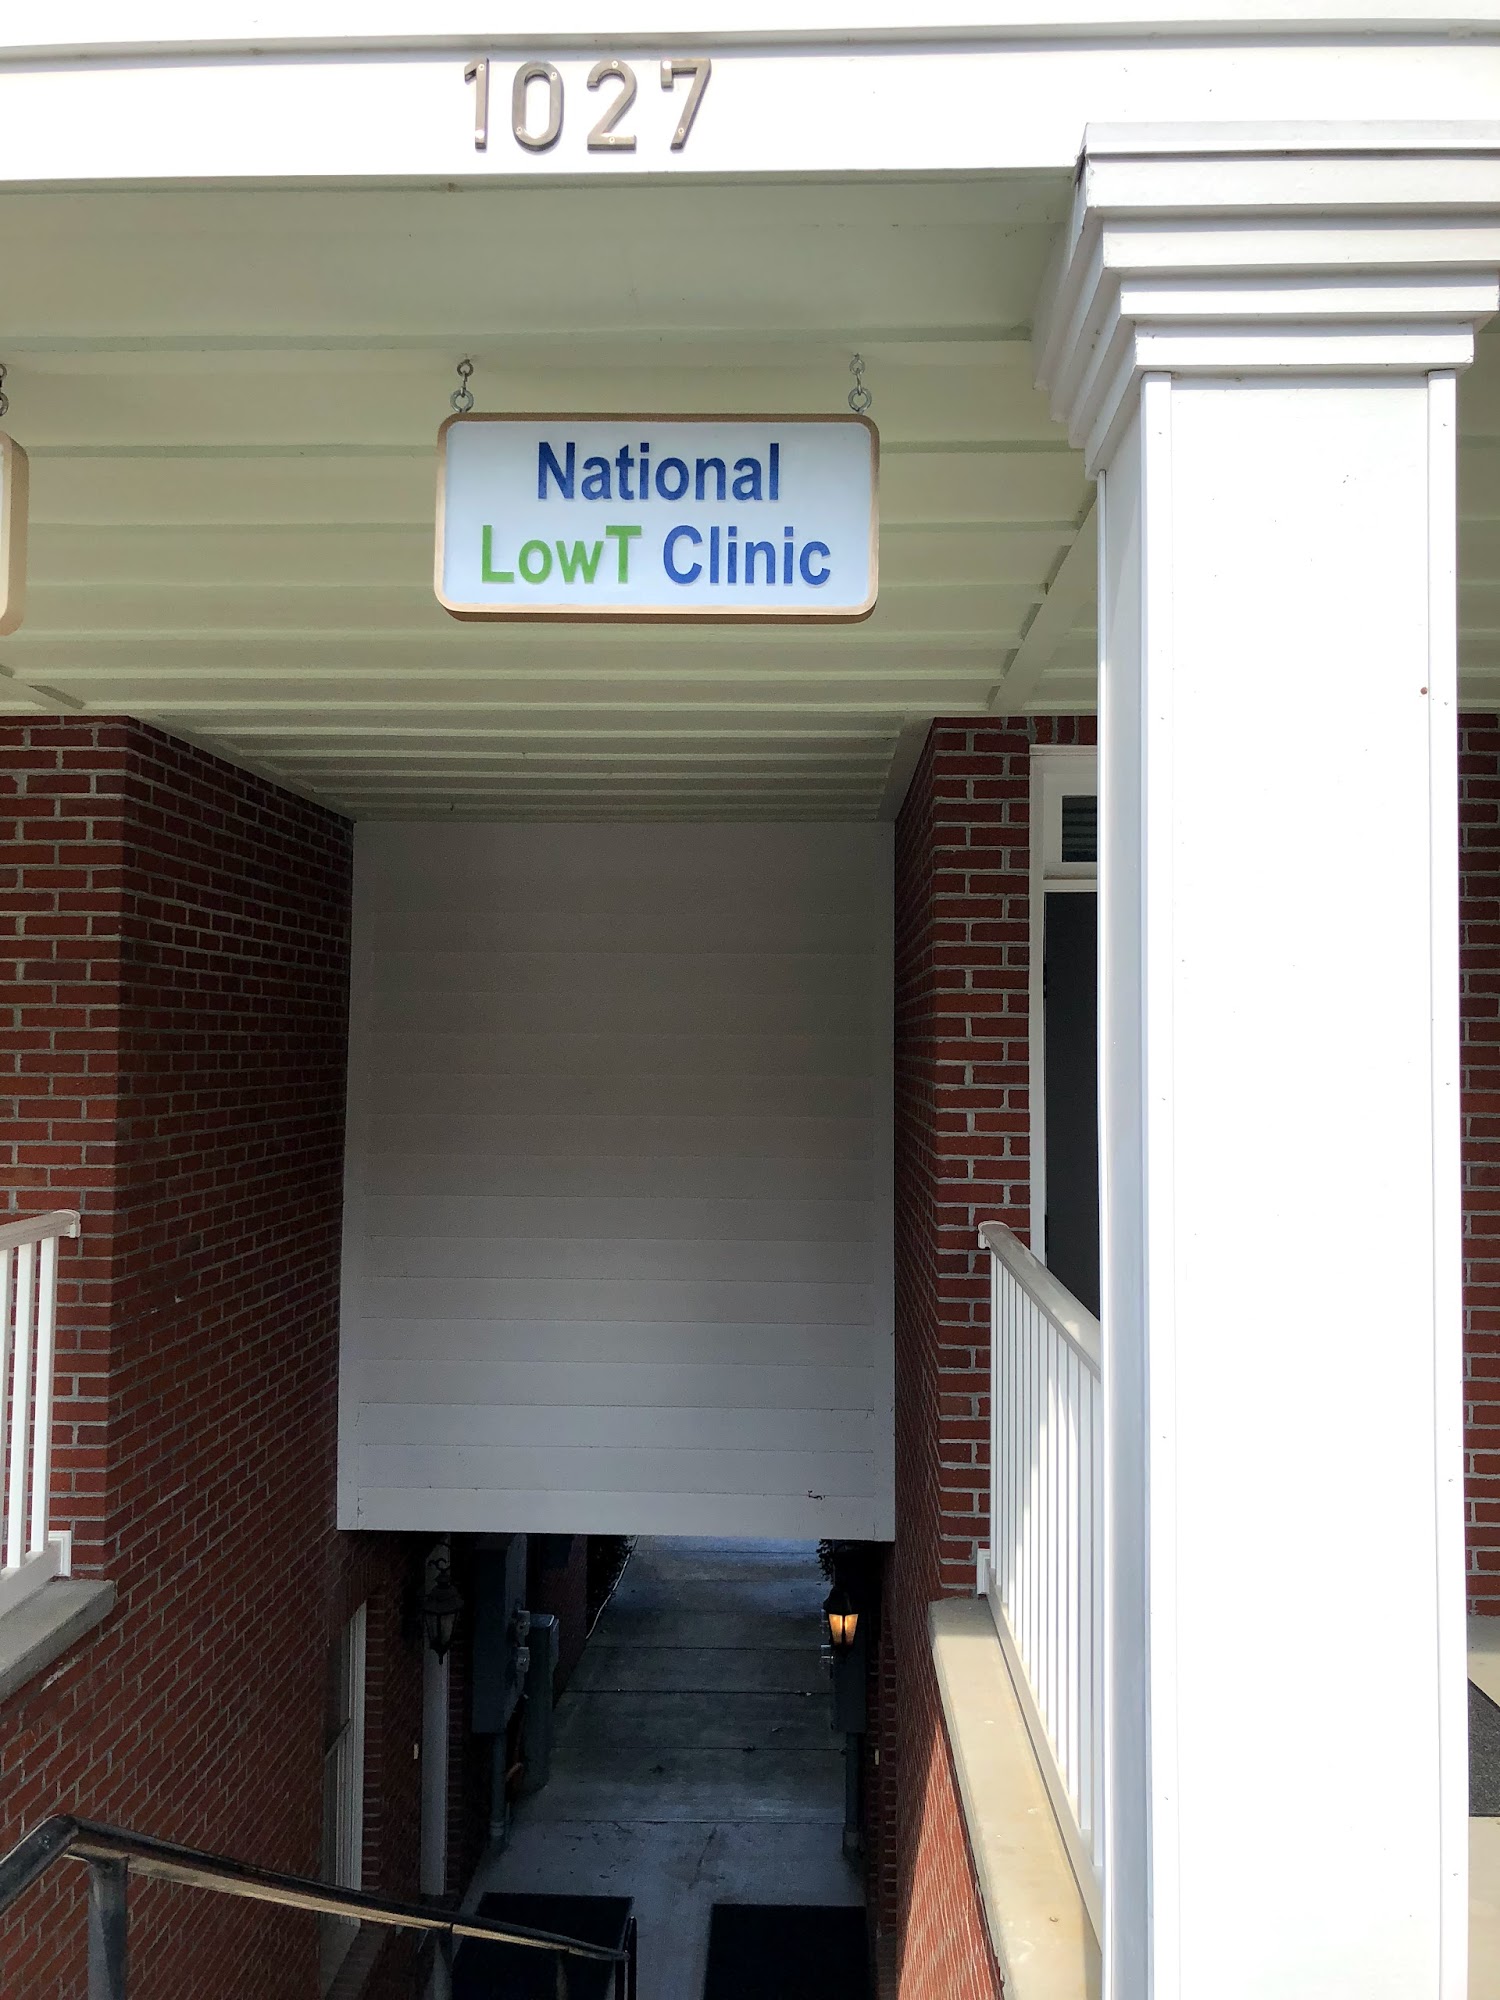 National Low T Clinic 1027 Waterford Pl, Kingston Tennessee 37763